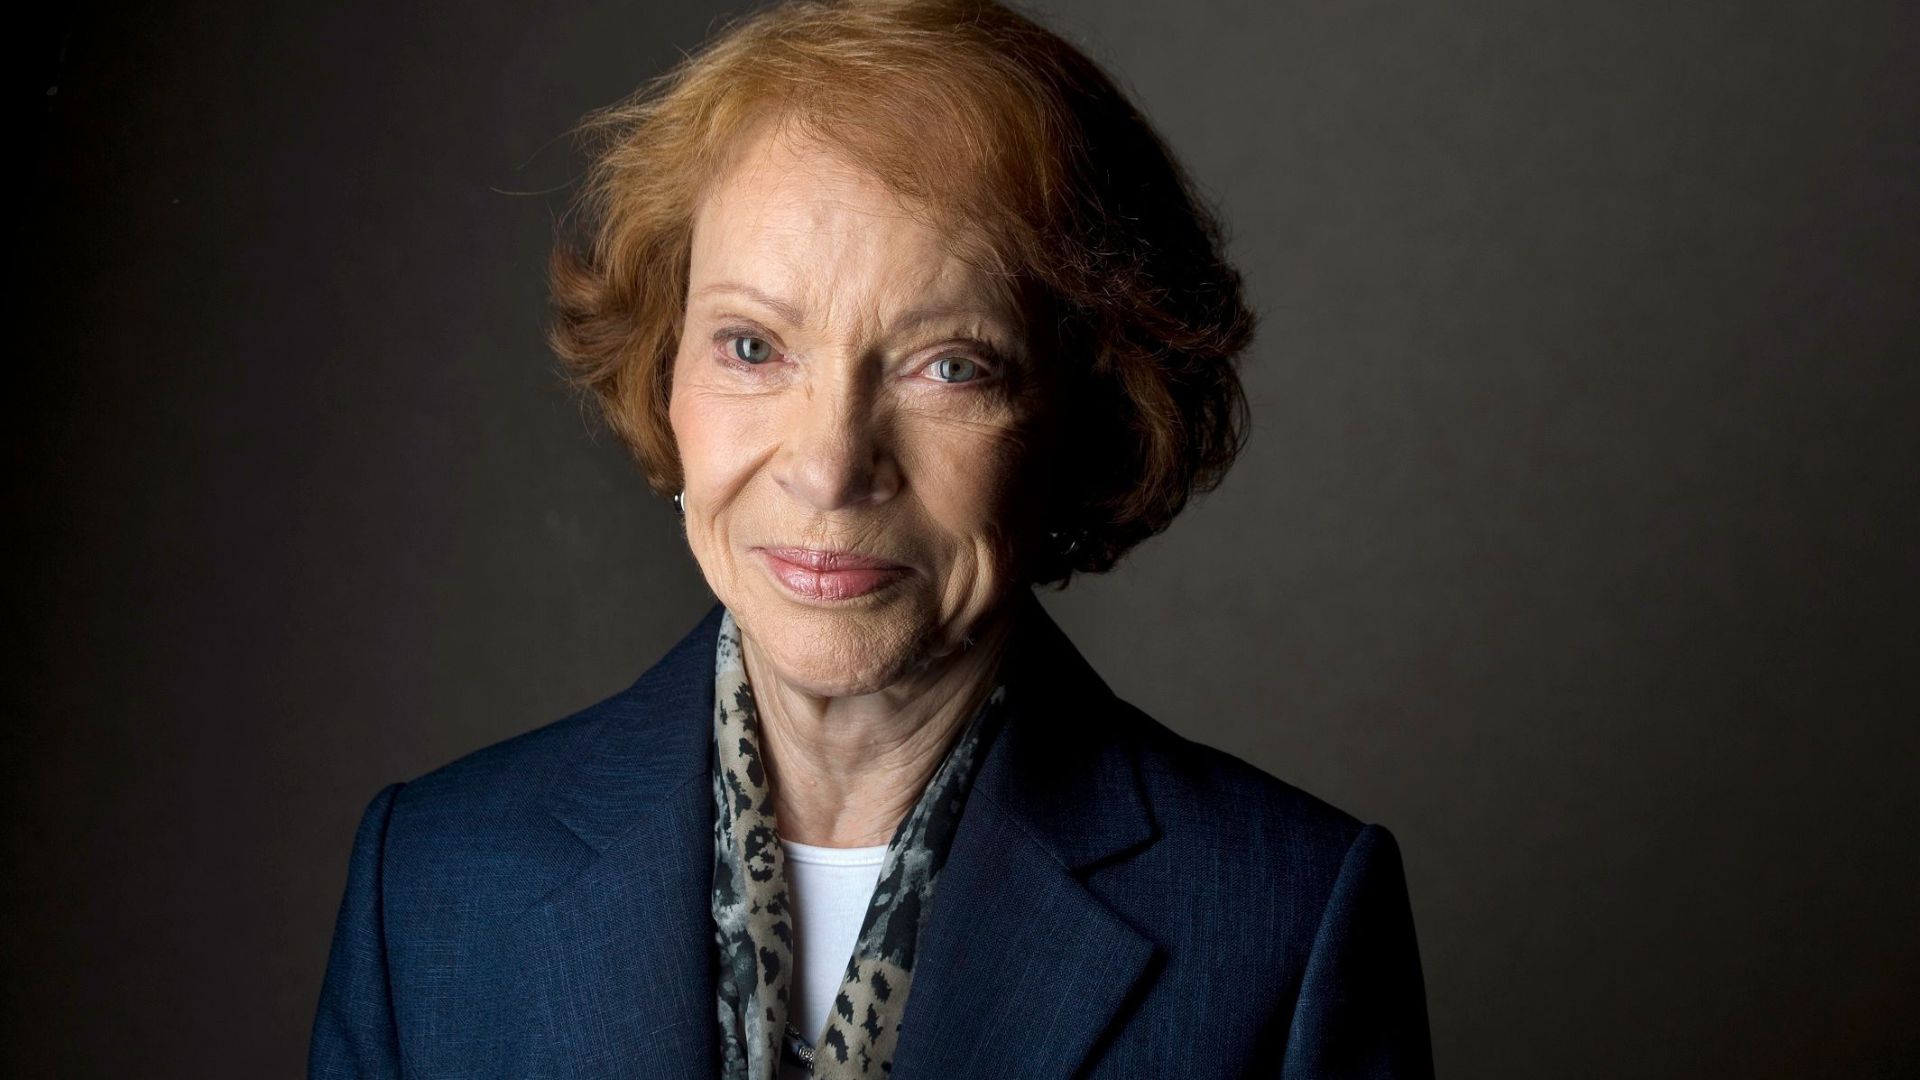 Rosalynn Carter Death: Former First Lady Passes At 96